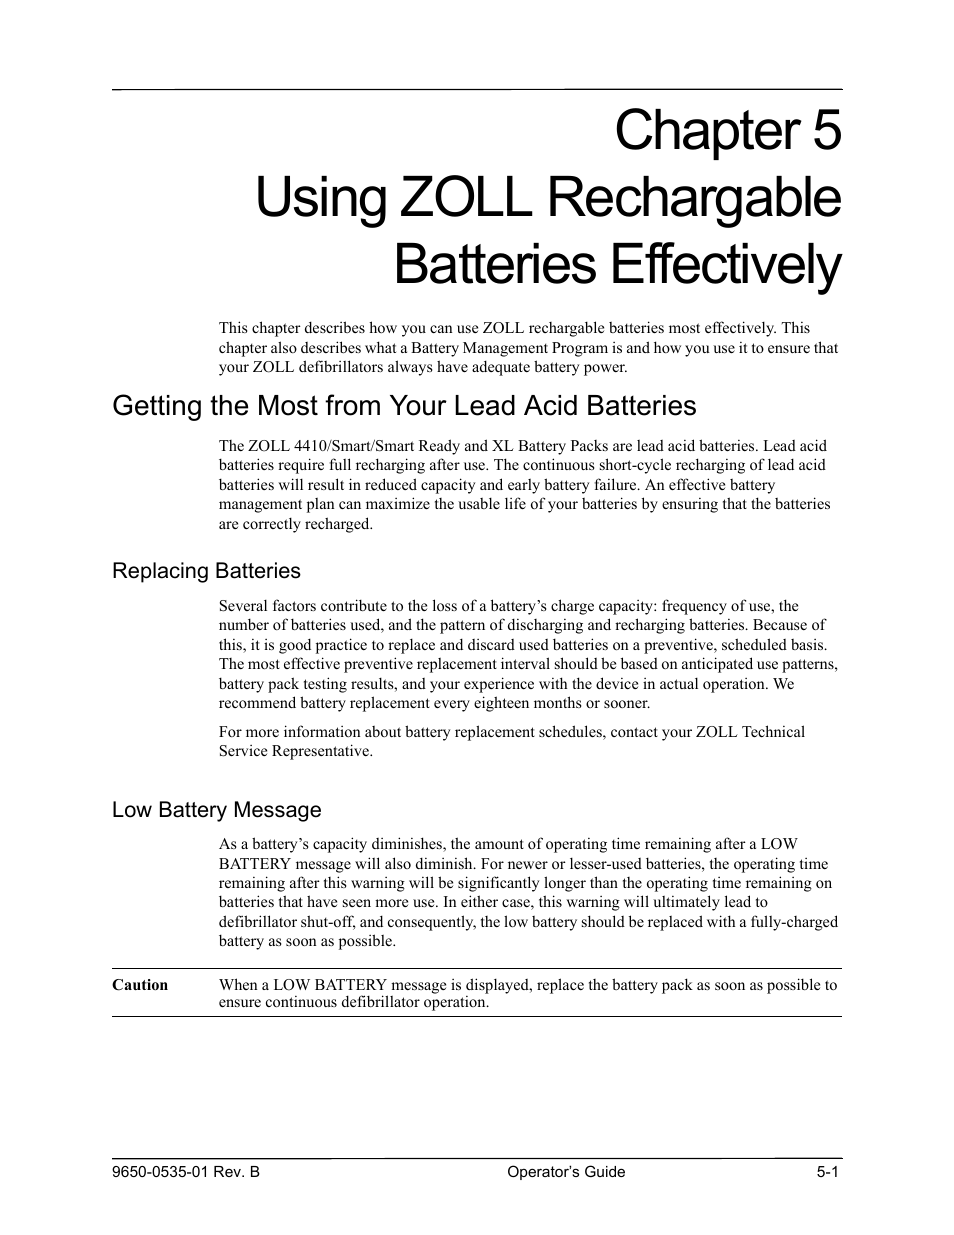 Getting the most from your lead acid batteries | ZOLL SurePower Rev B Charger Station User Manual | Page 35 / 44